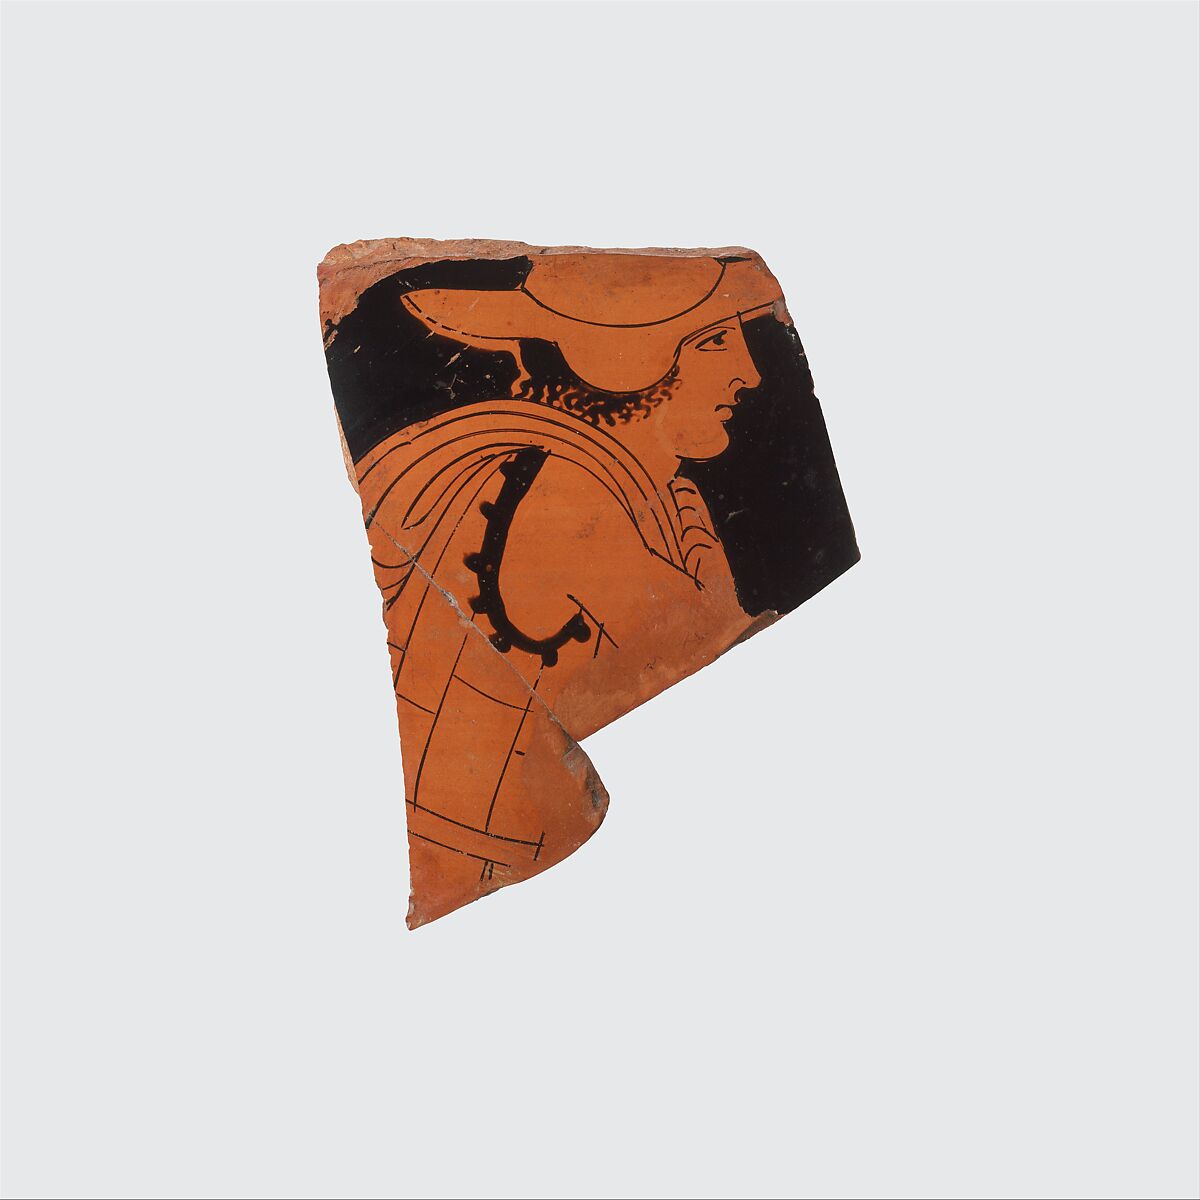 Fragment of a terracotta column-krater (bowl for mxing wine and water), Attributed to the Niobid Painter, Terracotta, Greek, Attic 